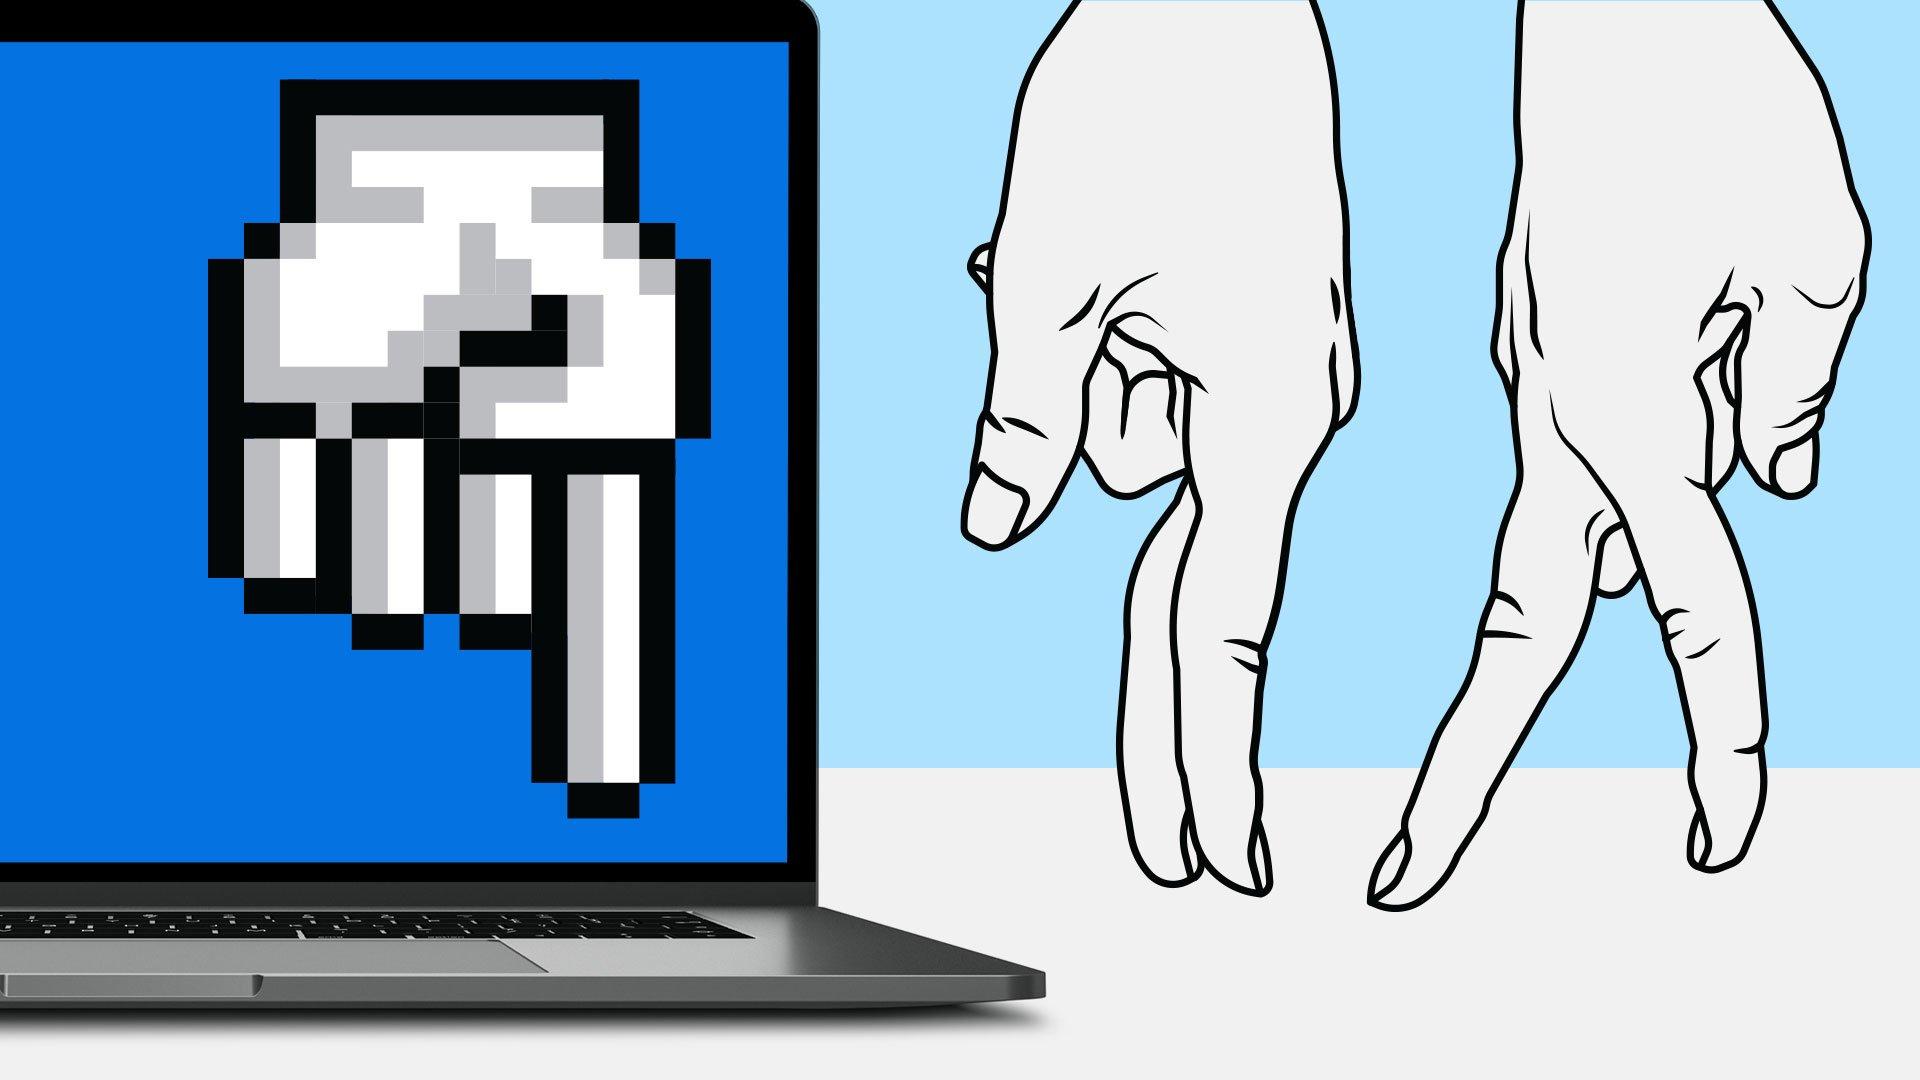 Graphic shows a pair of dancing fingers beside a laptop picturing a downward pointing hand